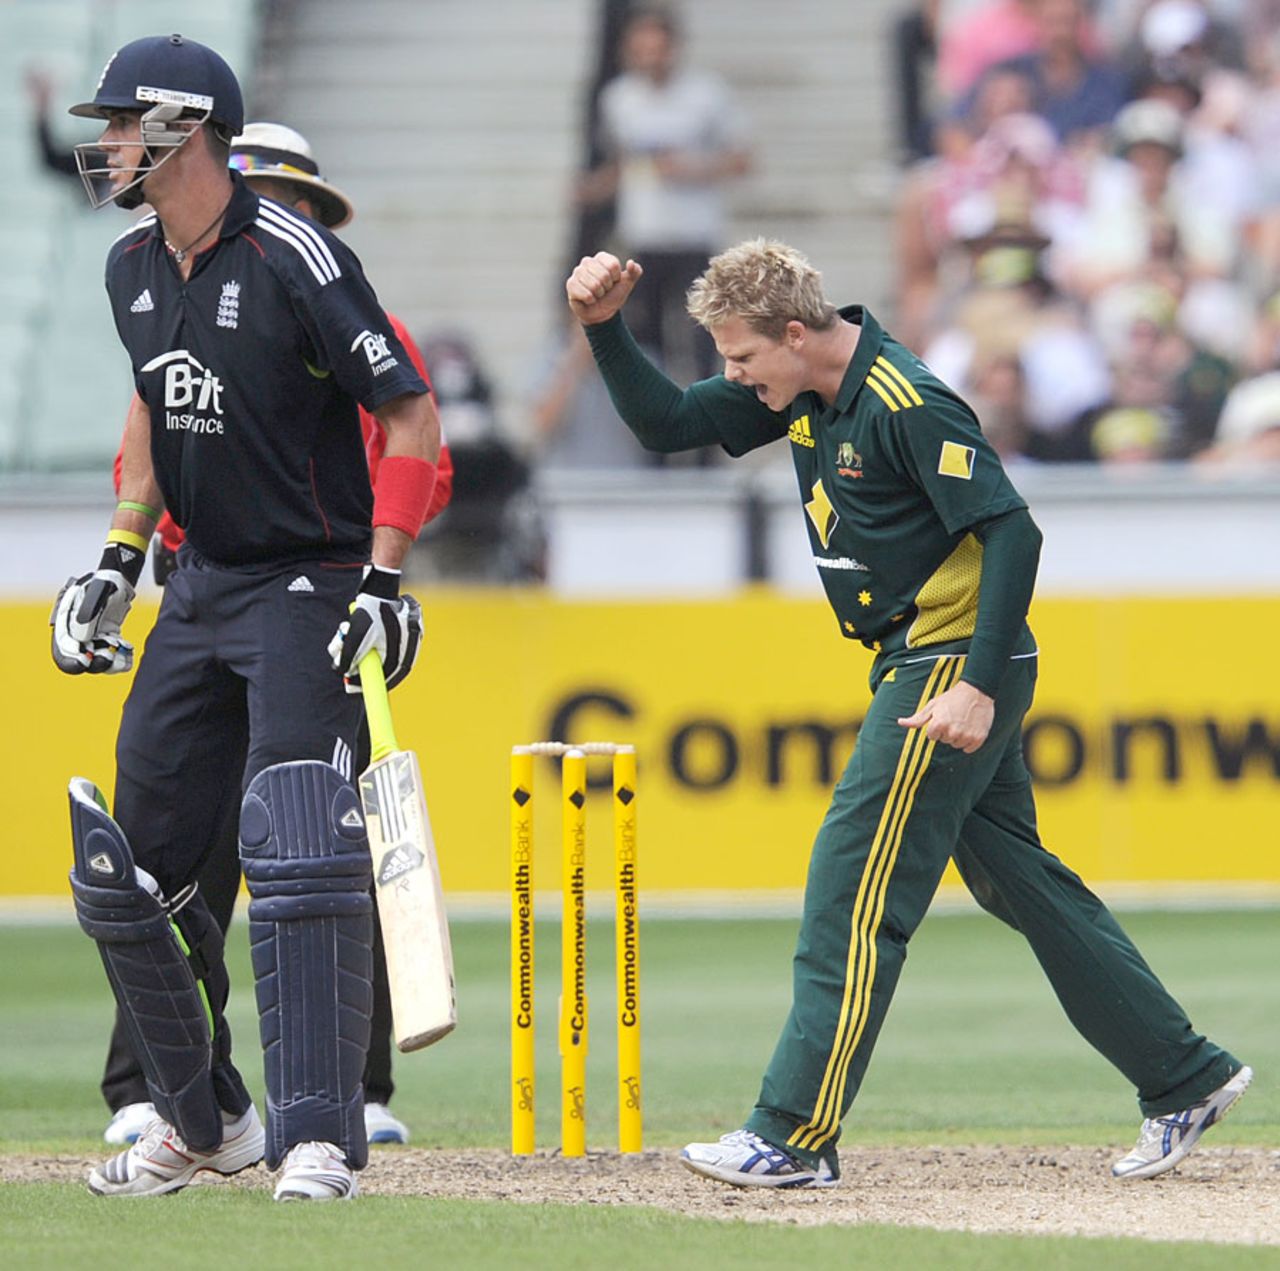 Steve Smith took two middle-order wickets to slow England, Australia v England, 1st ODI, Melbourne, January 16, 2010